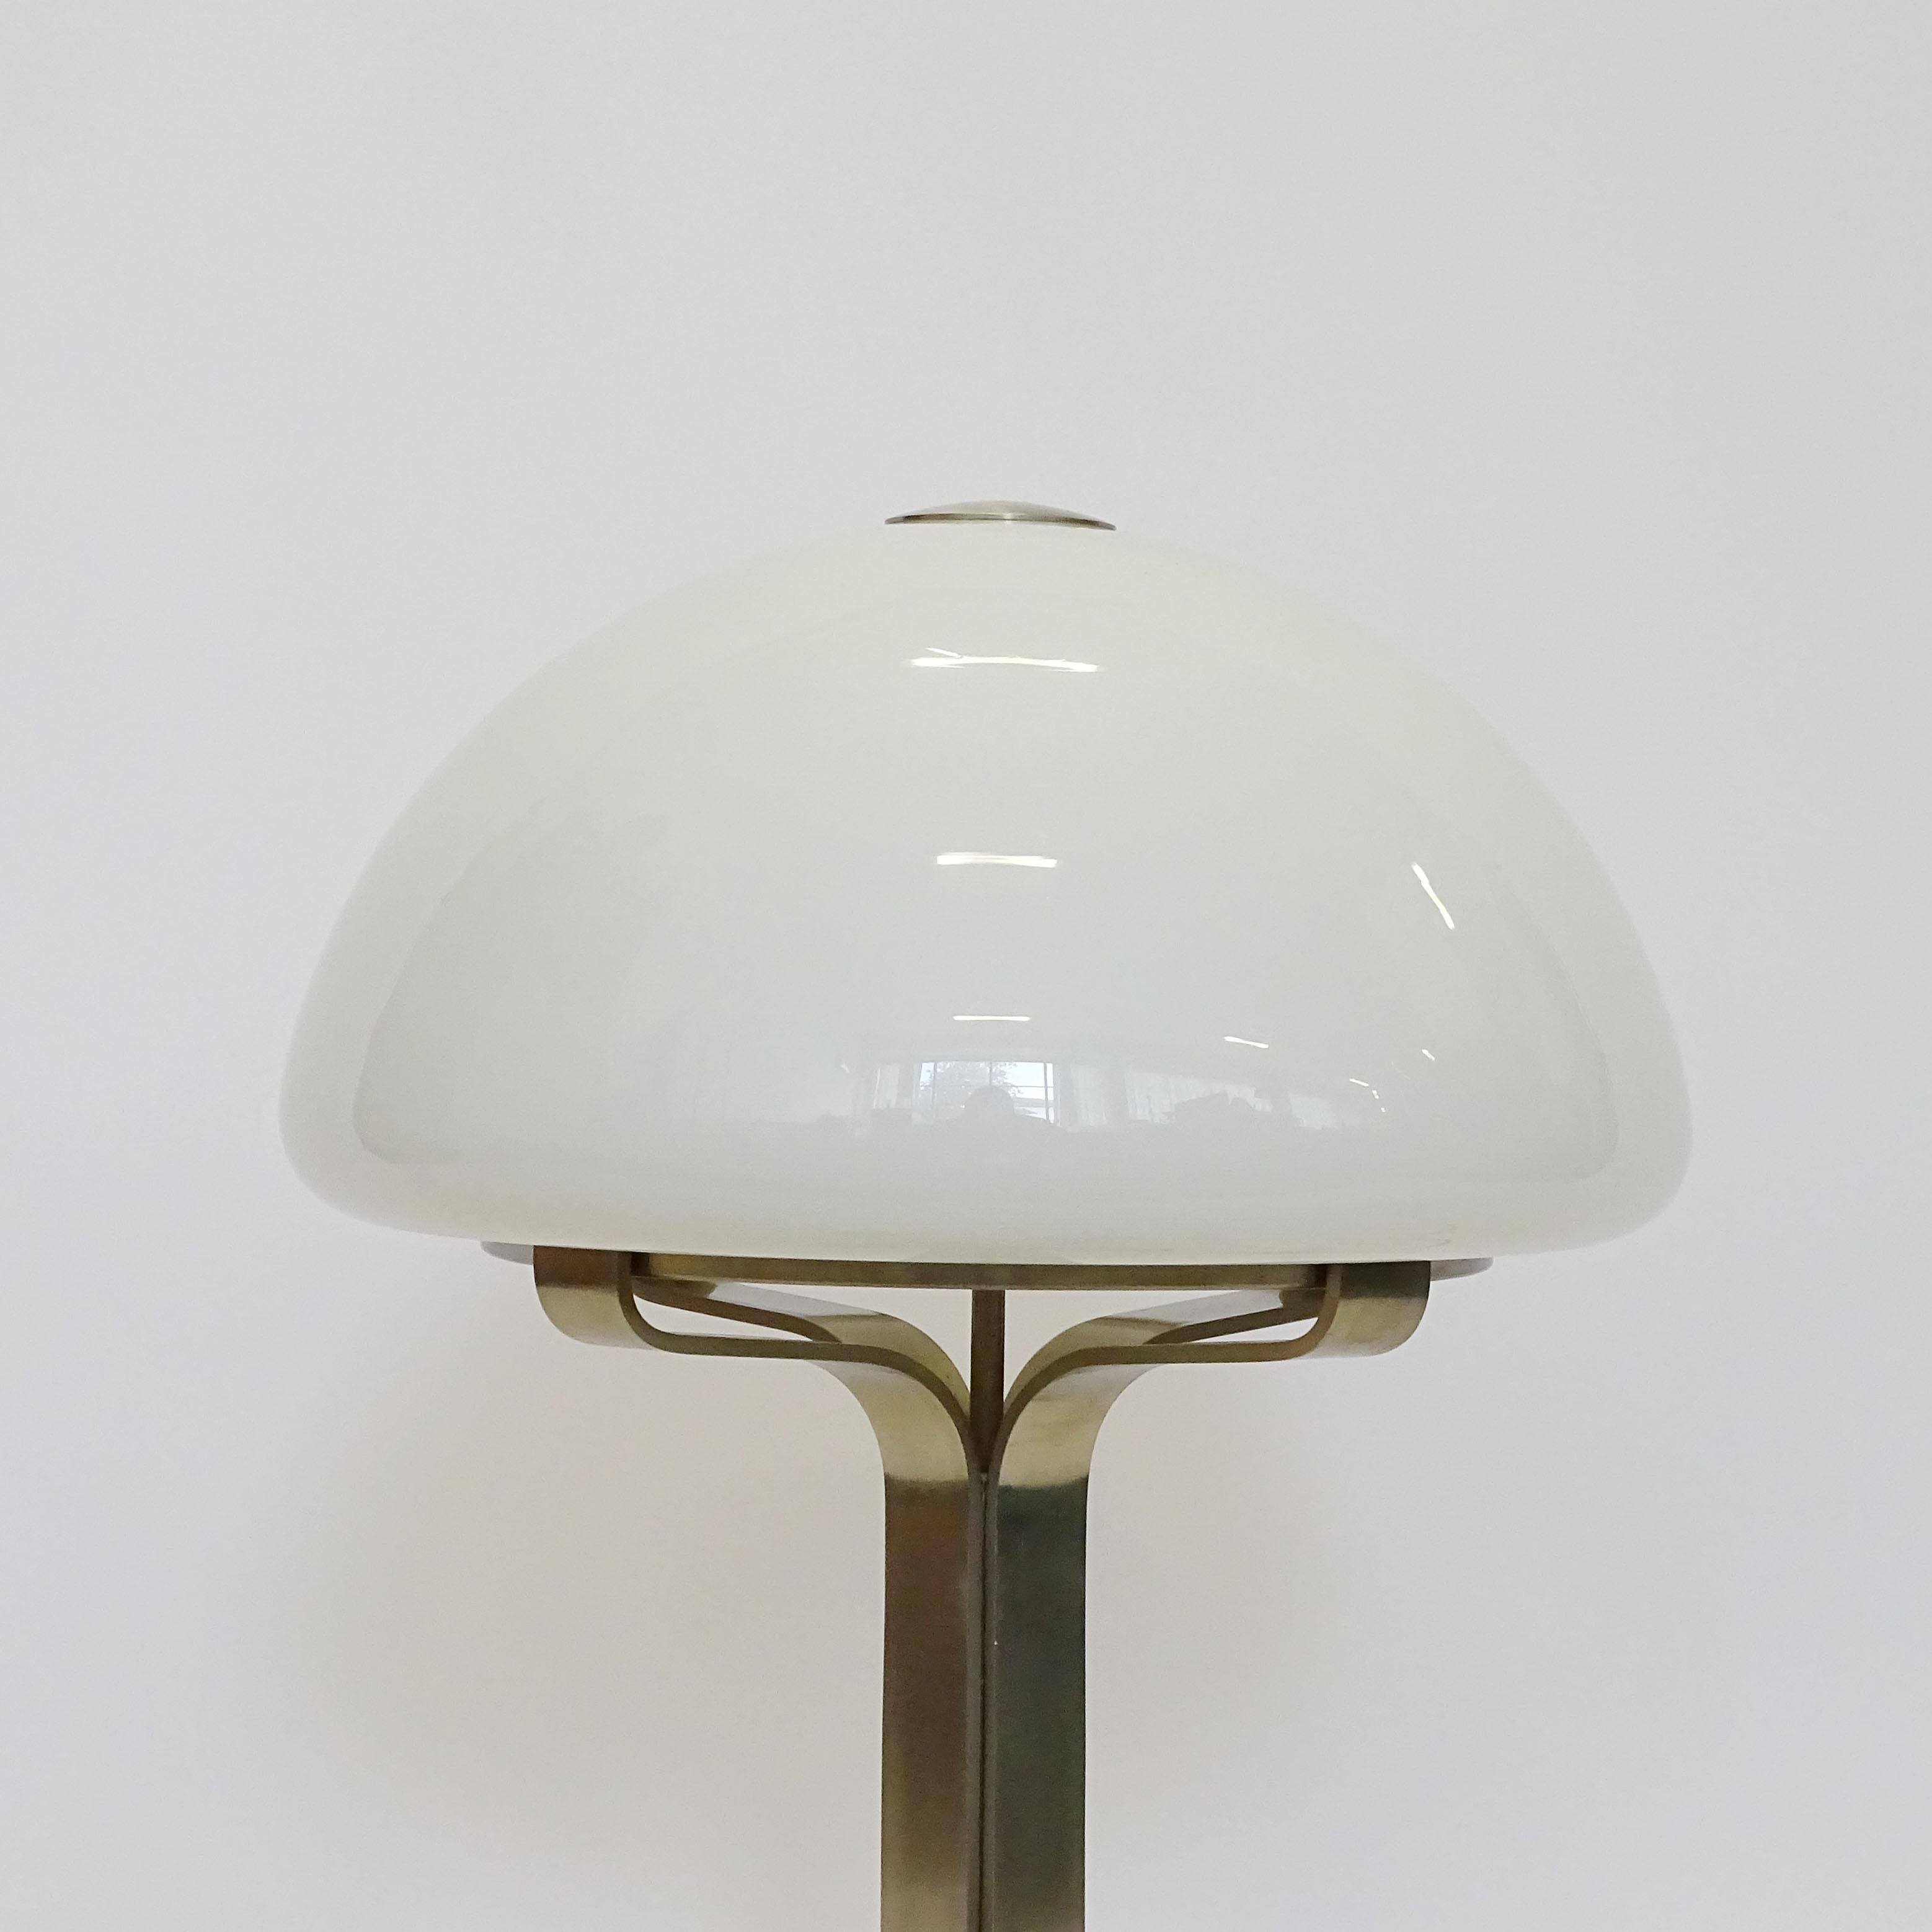 Italian 1960s table lamp in white glass and nickel.